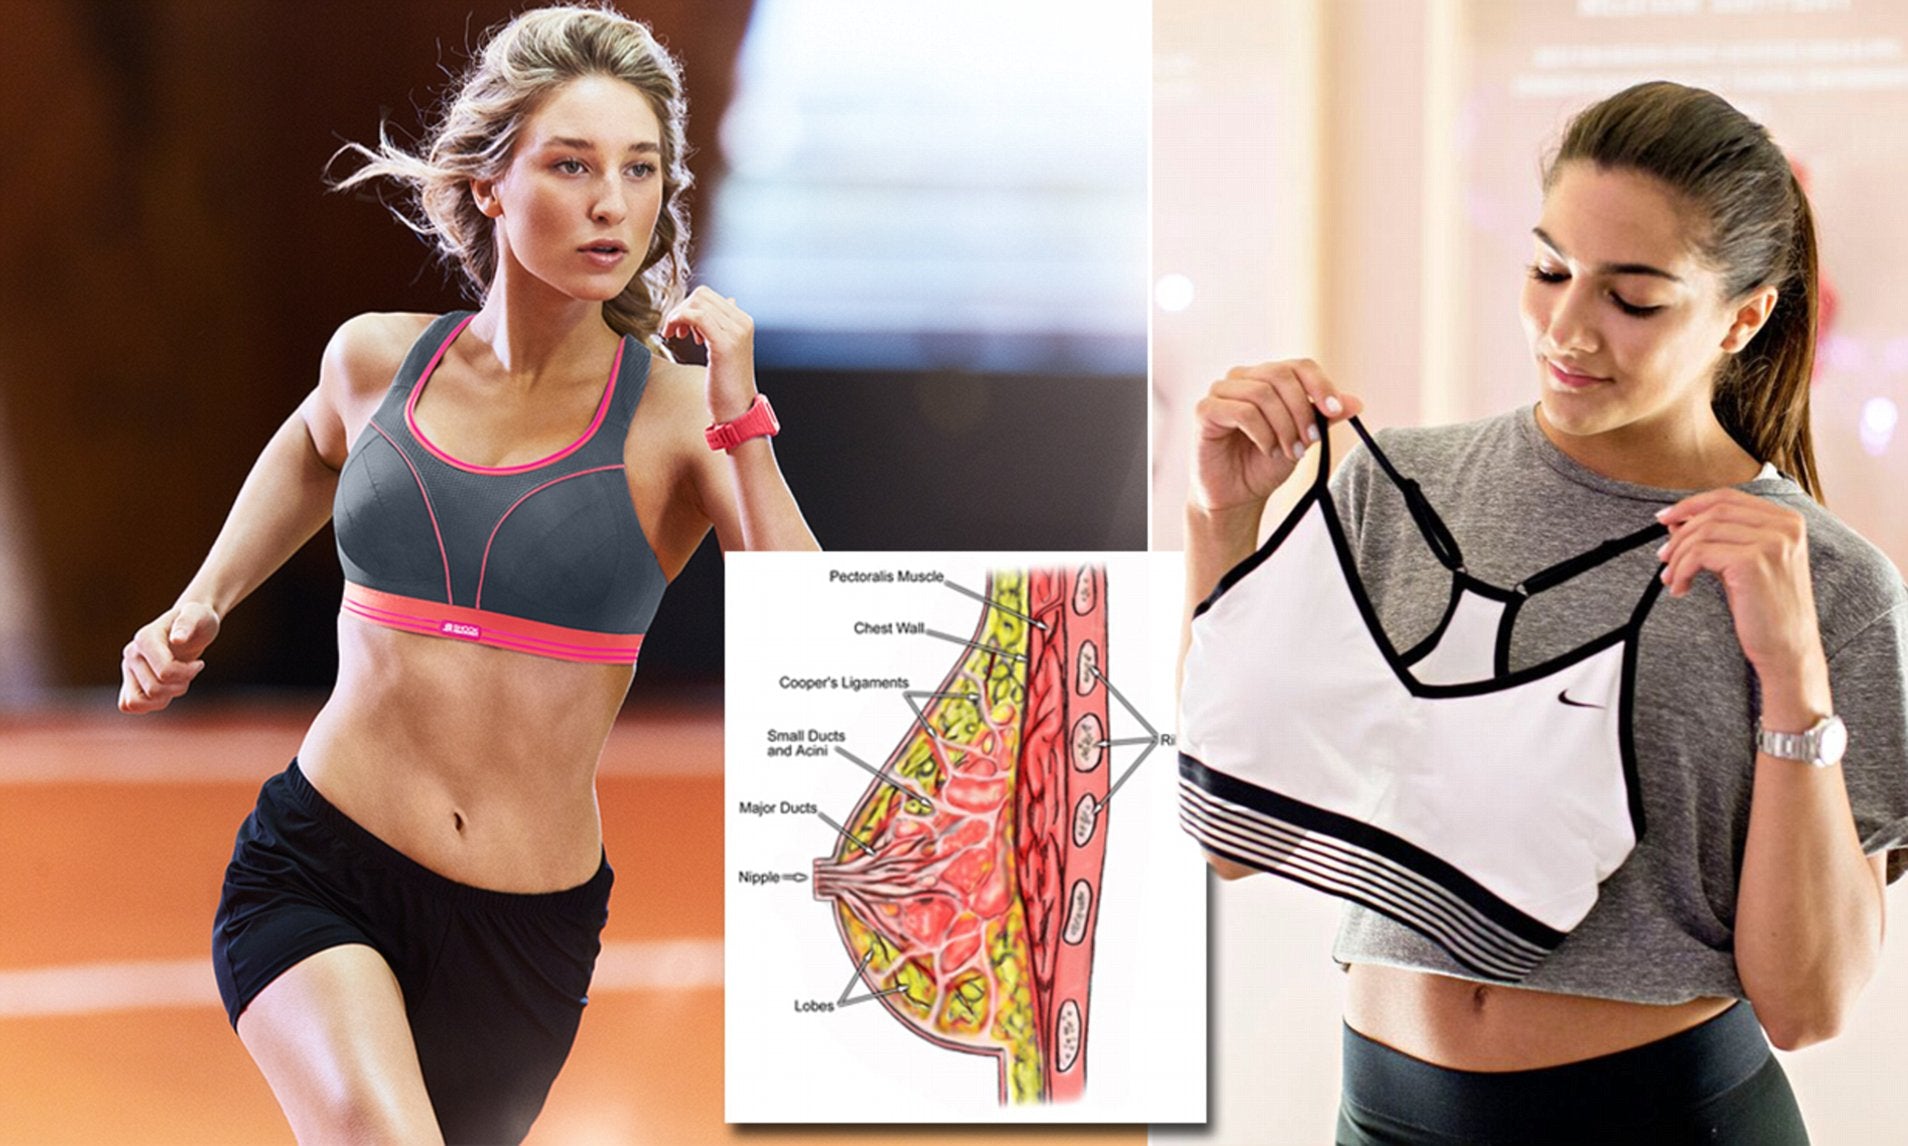 Can Wearing A Sports Bra Cause Breast Pain? – solowomen